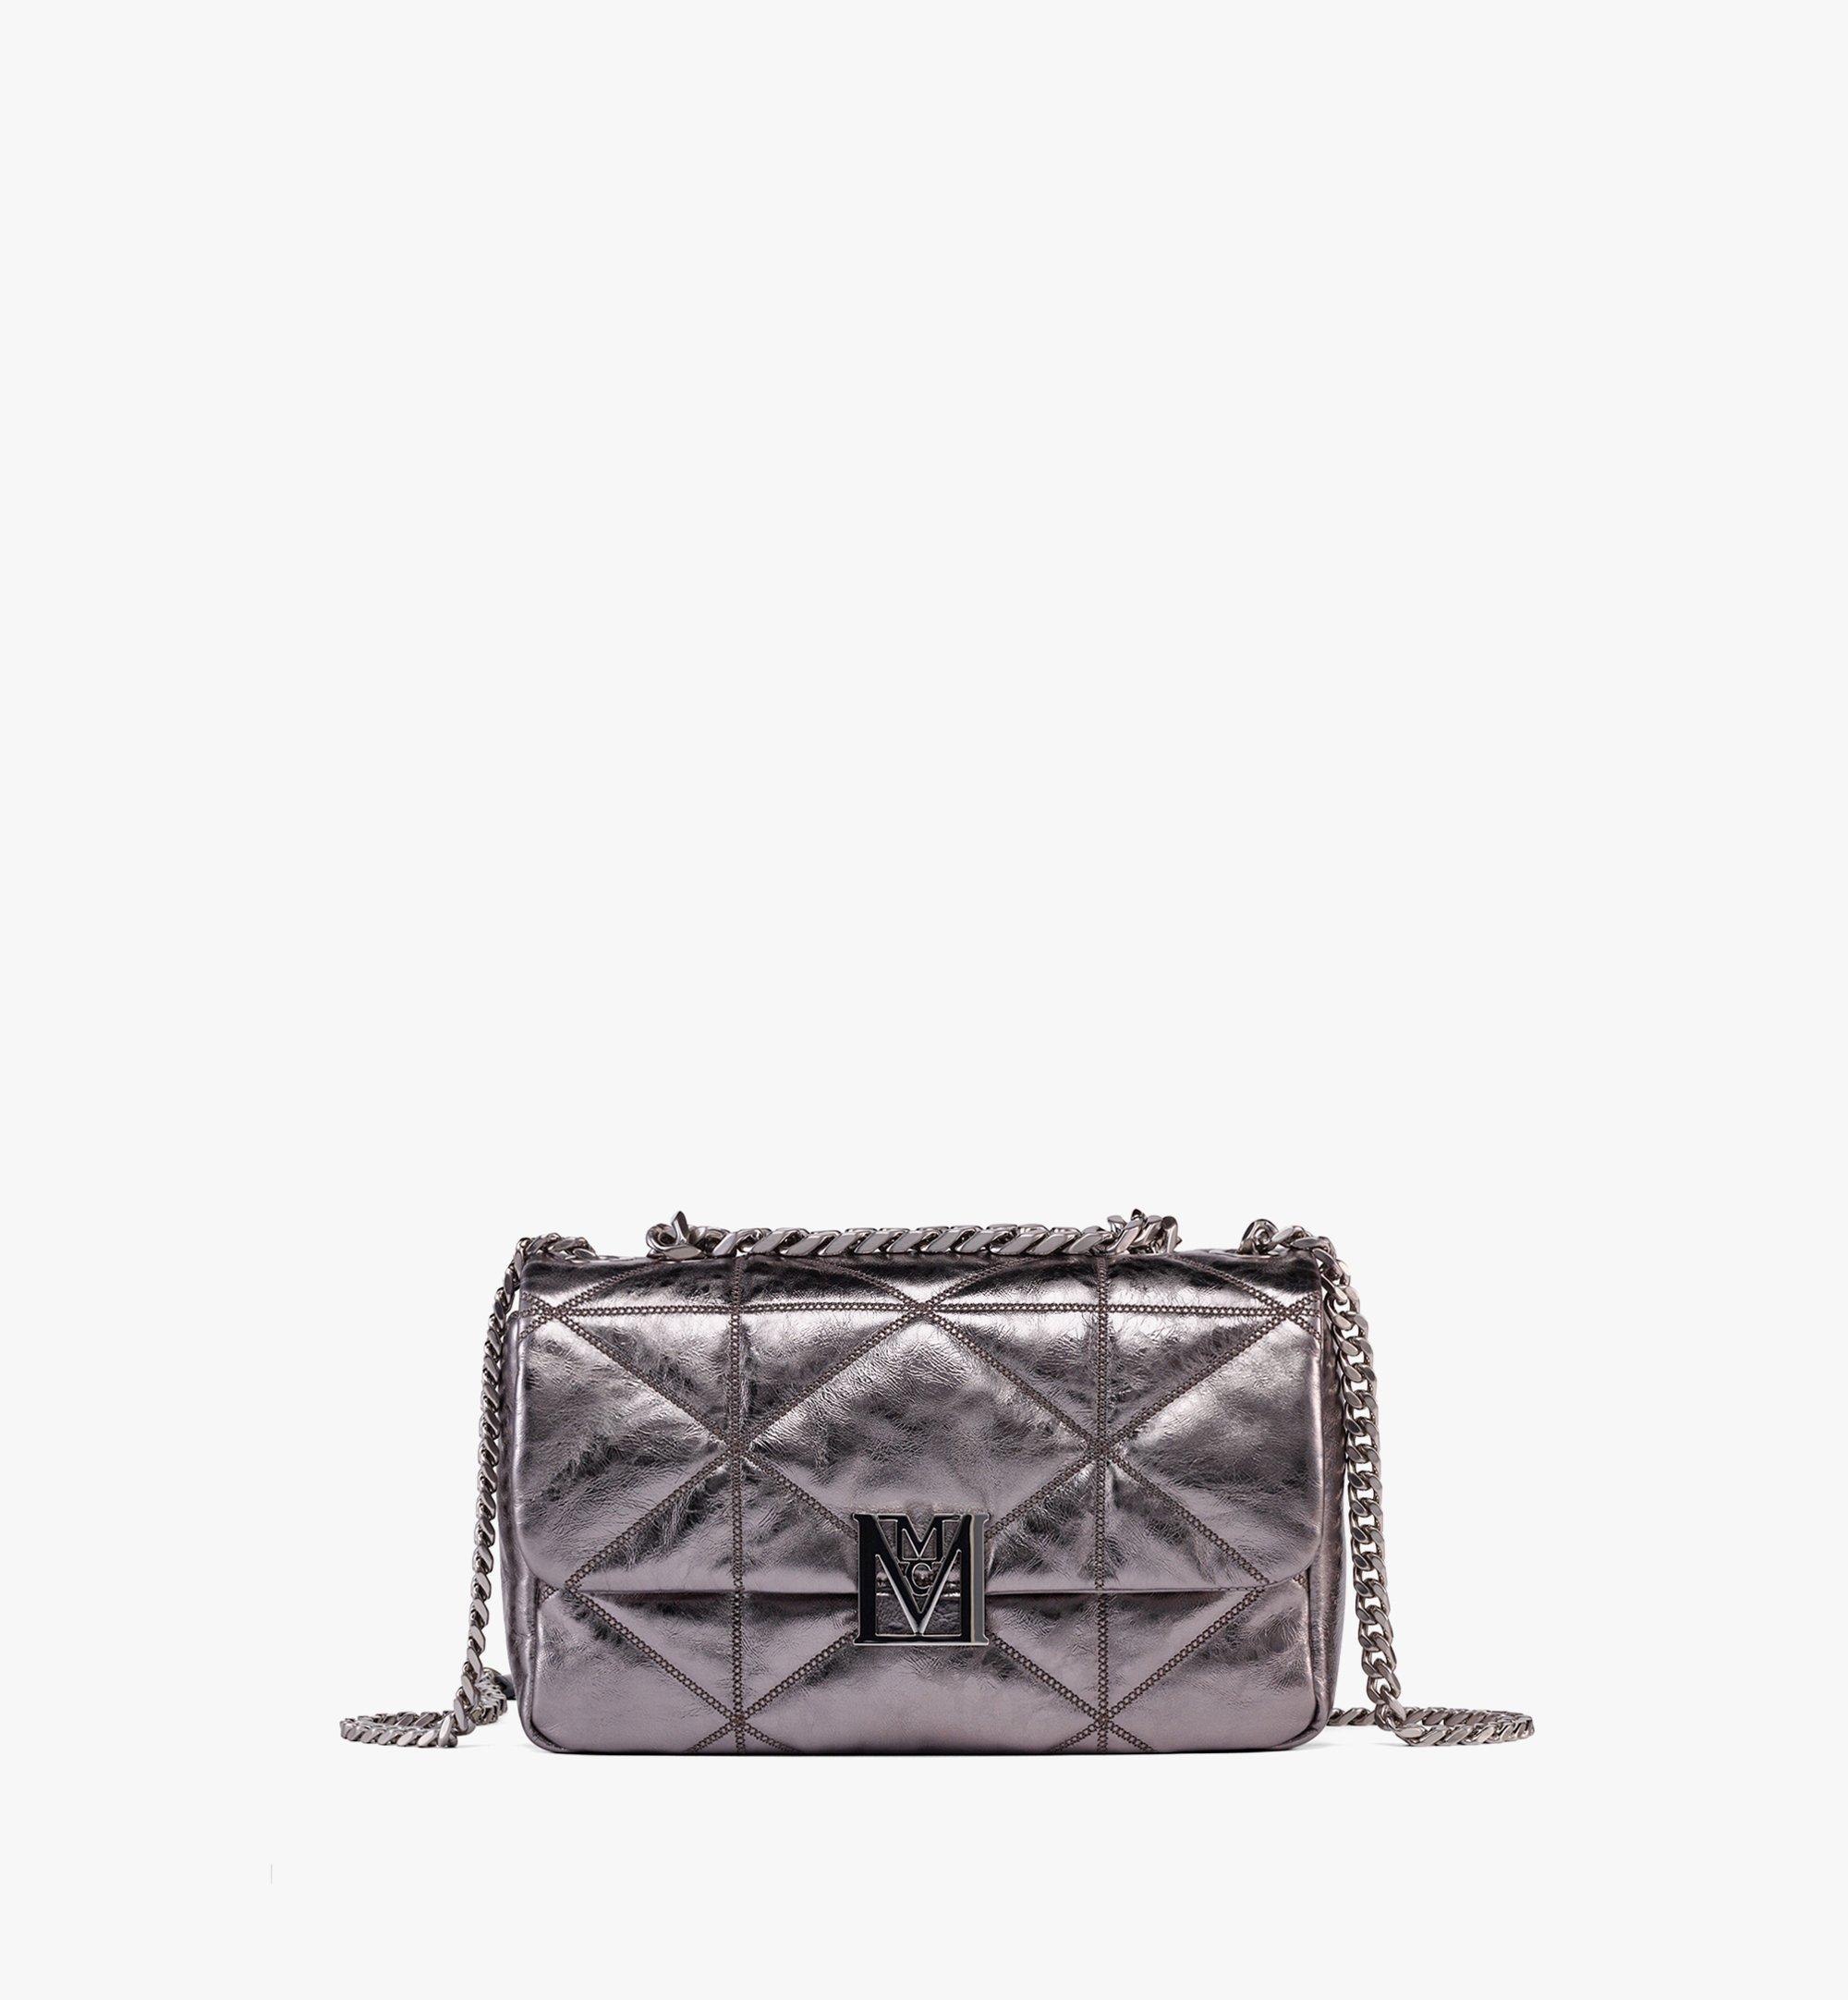 Mcm Travia Quilted Shoulder Bag in Crushed Calf Leather Silver Leather